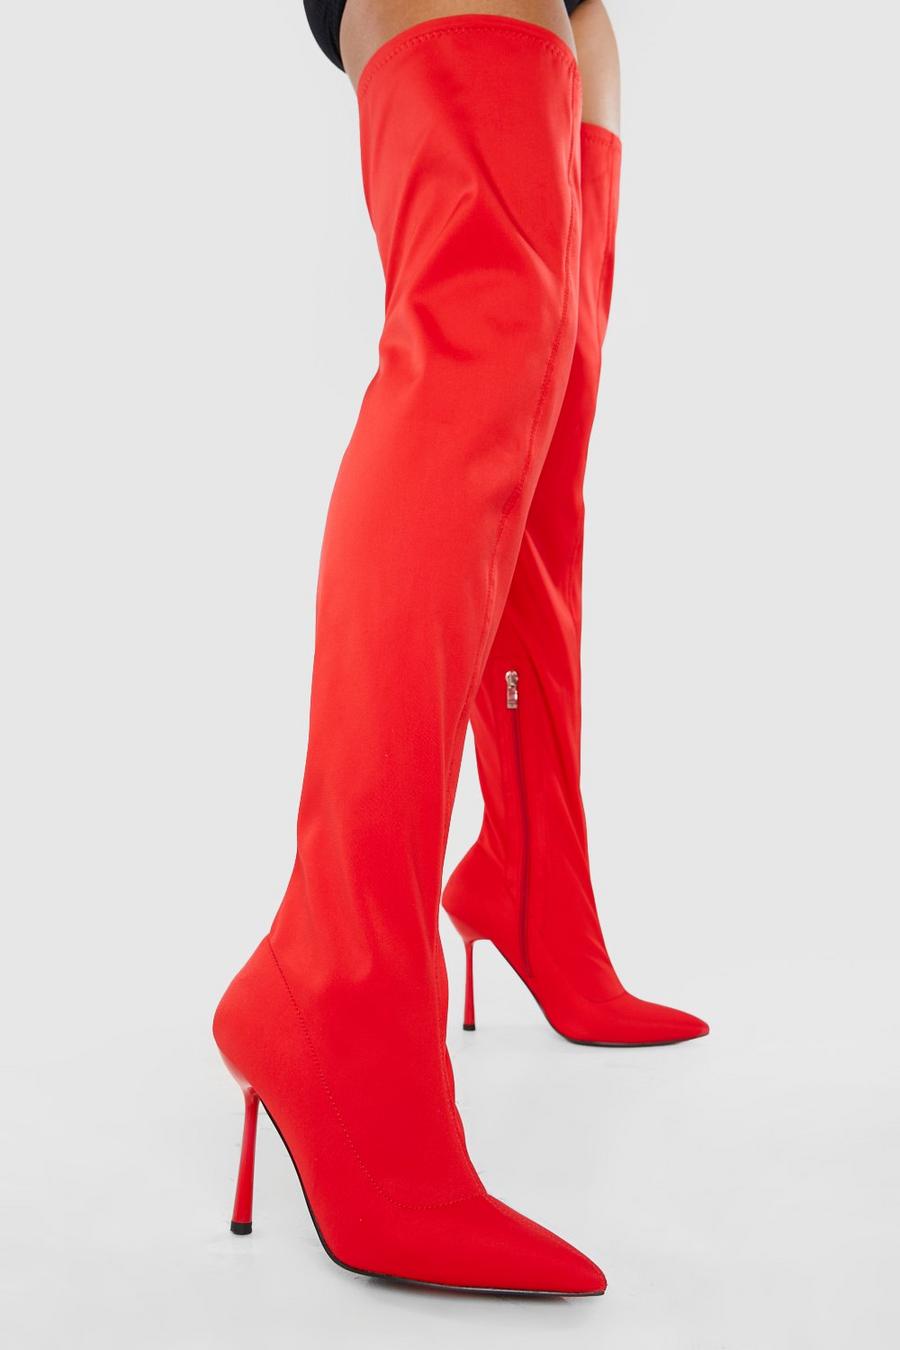 Red Stretch Neoprene Thigh High Stiletto Boots image number 1